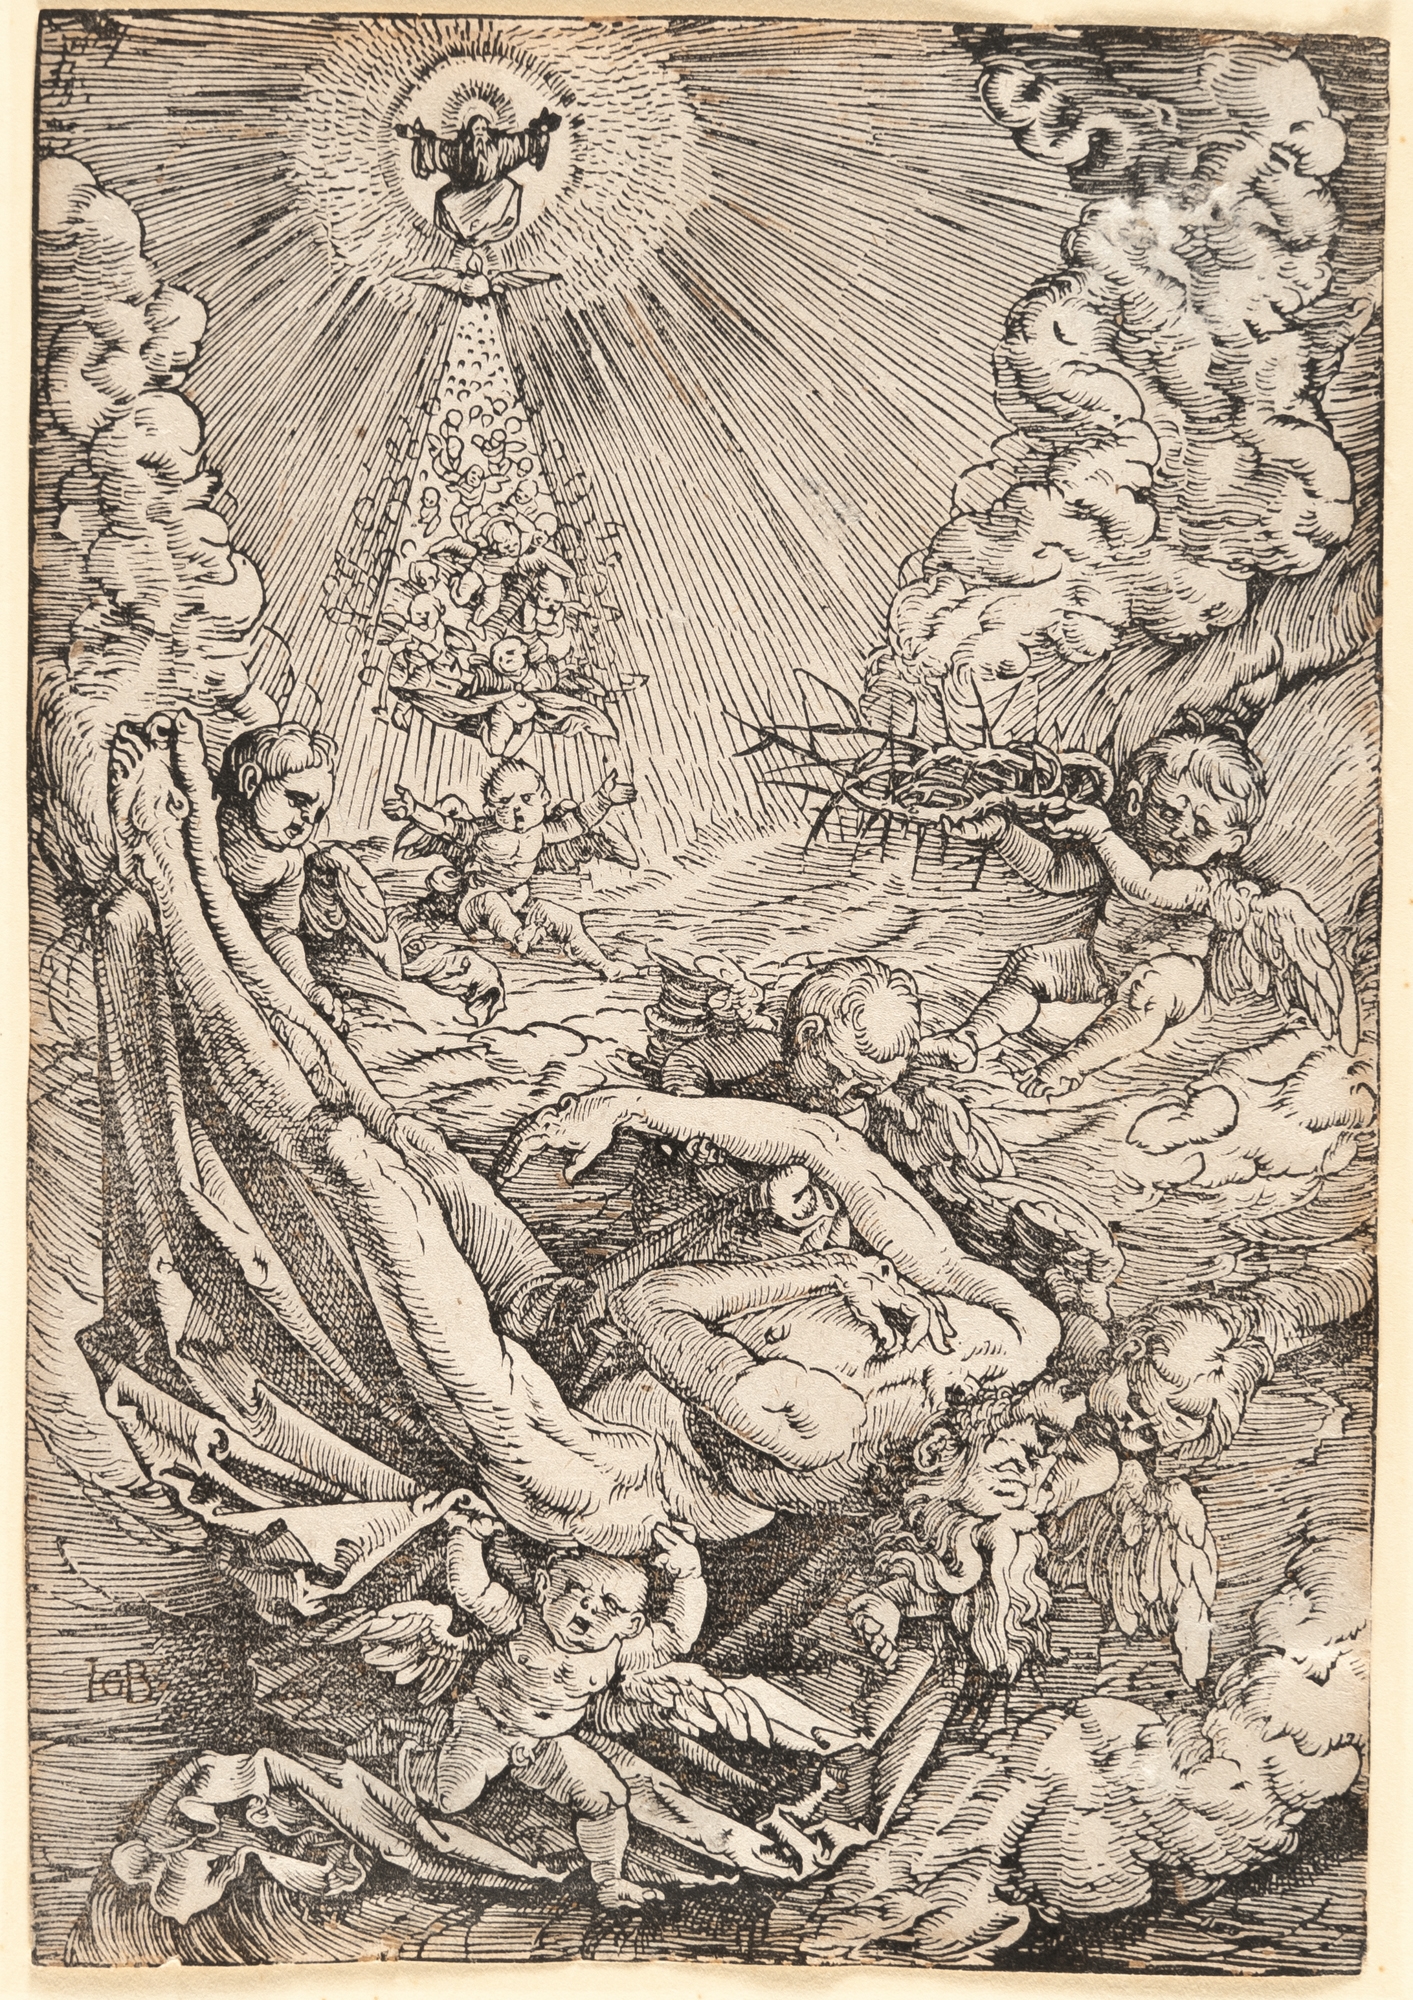 The Body of Christ carried by angles towards heaven by Hans Baldung Grien, 1516